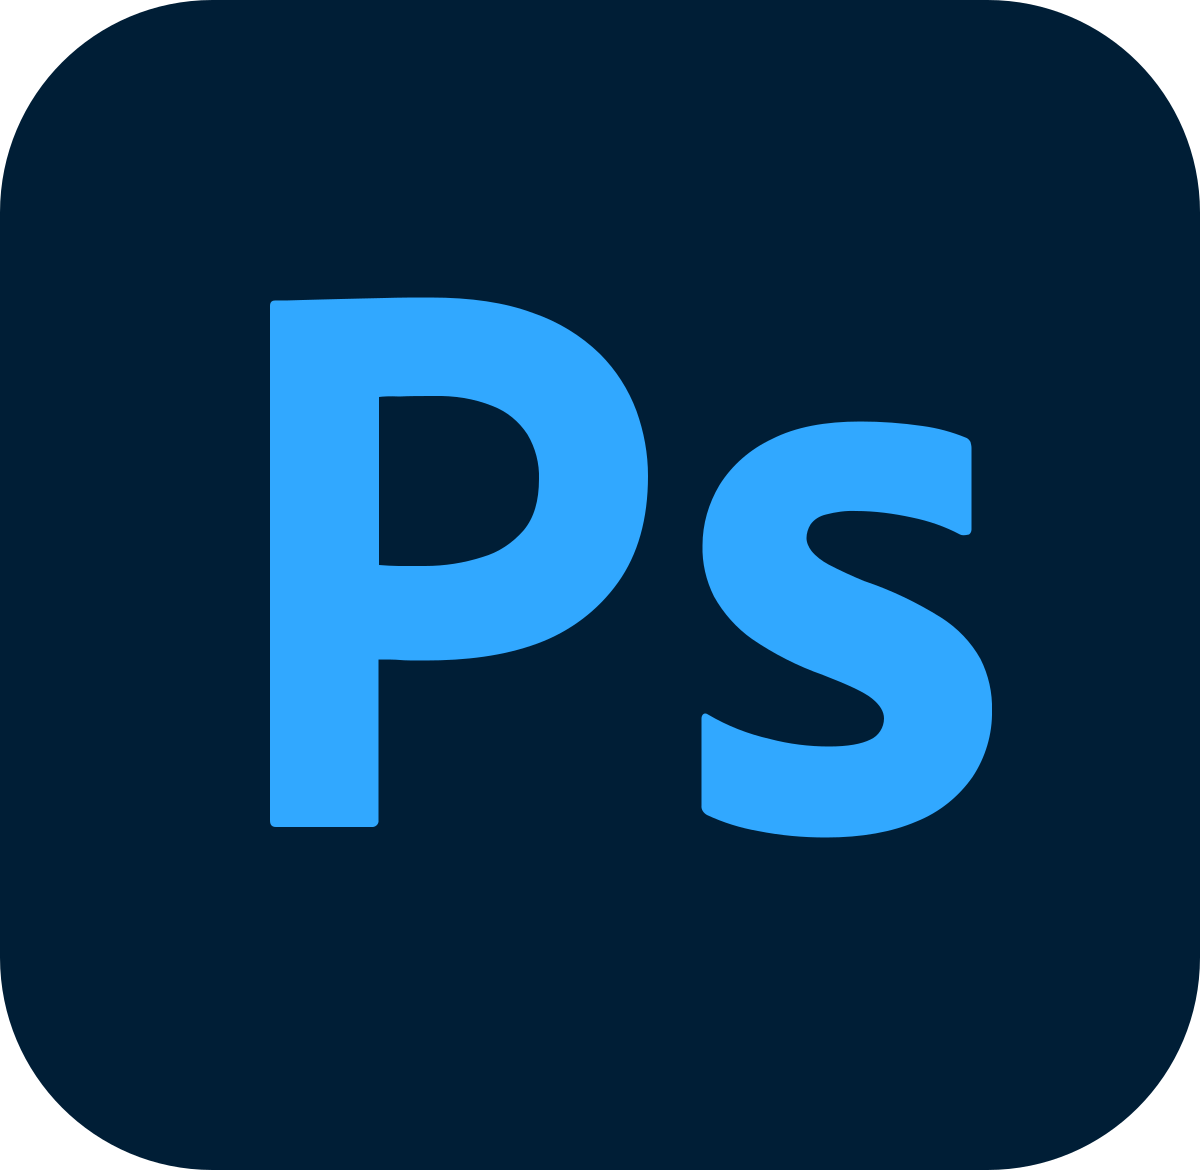 Photoshop interface with PNG file options